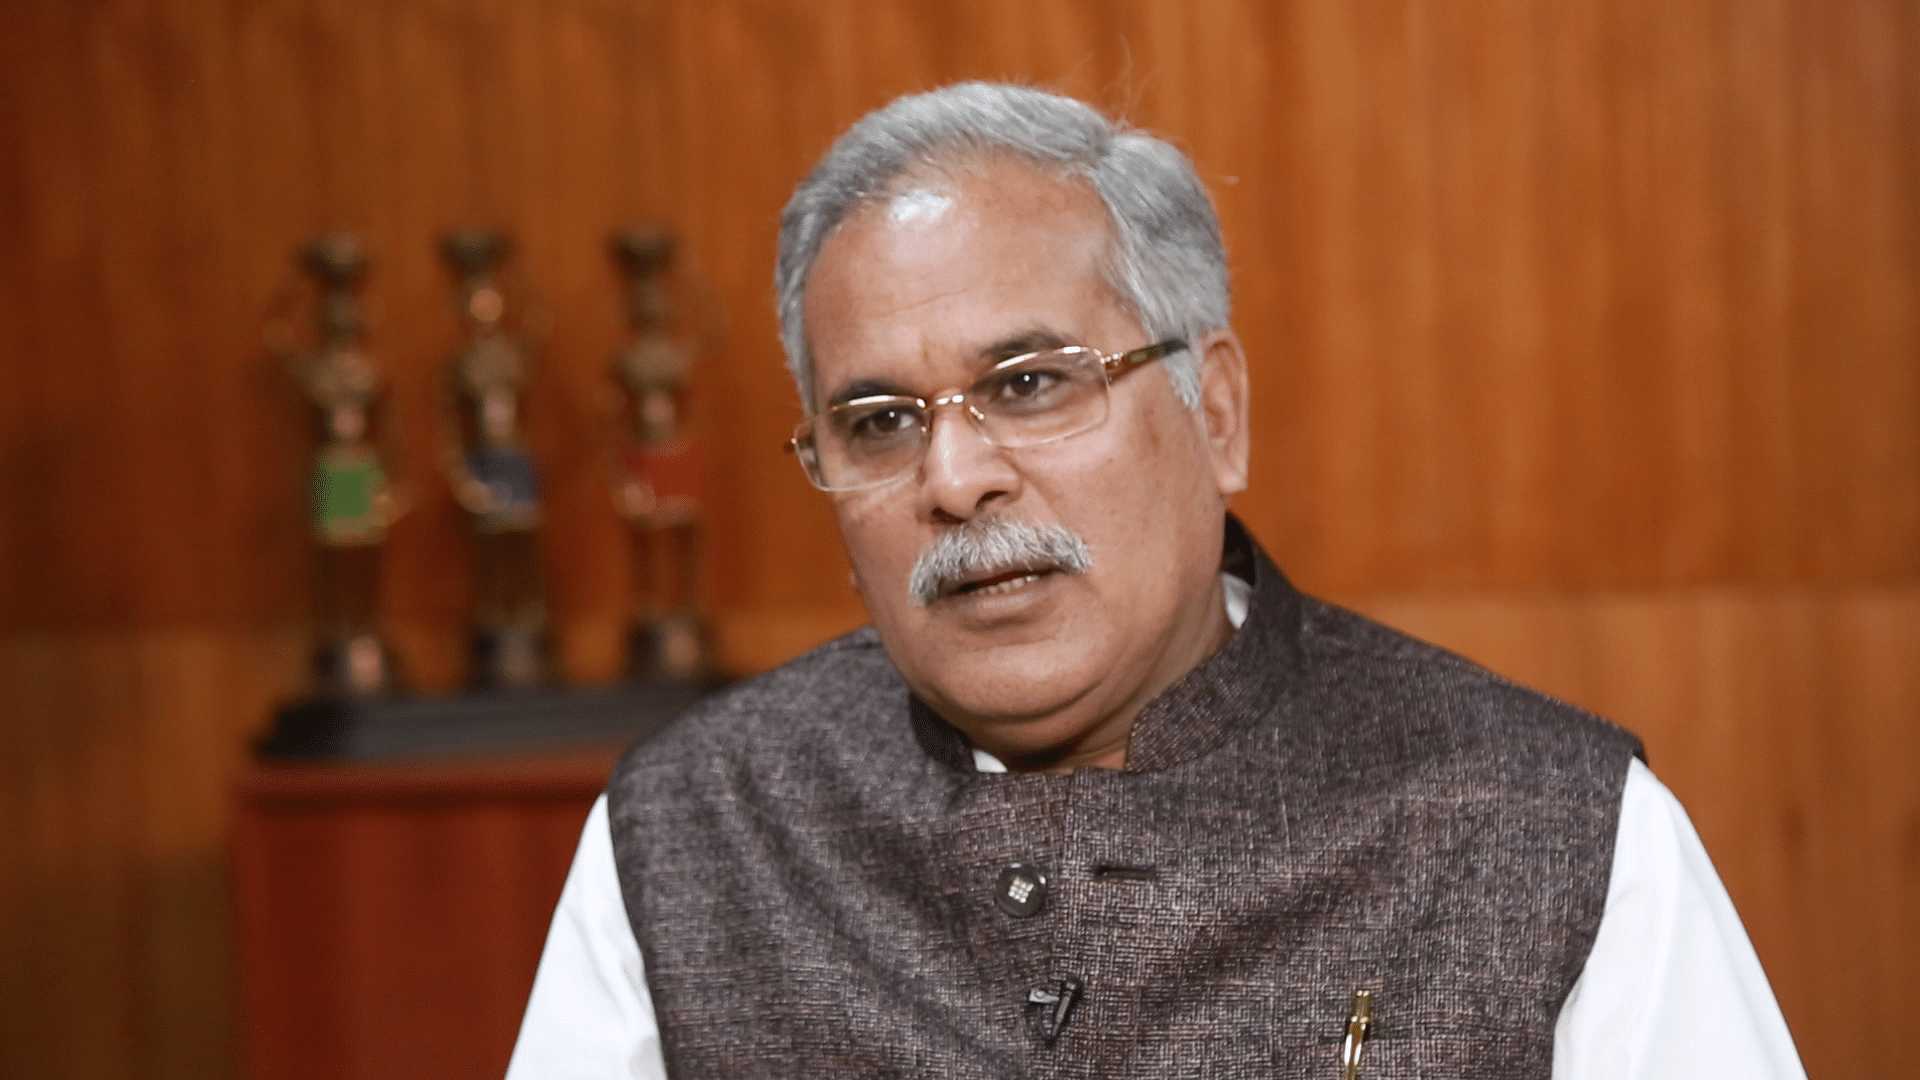 <div class="paragraphs"><p>Chhattisgarh Chief Minister Bhupesh Baghel also tweeted a video statement, saying that the EC should give a demo along with media and security personnel.</p><p><br></p></div>